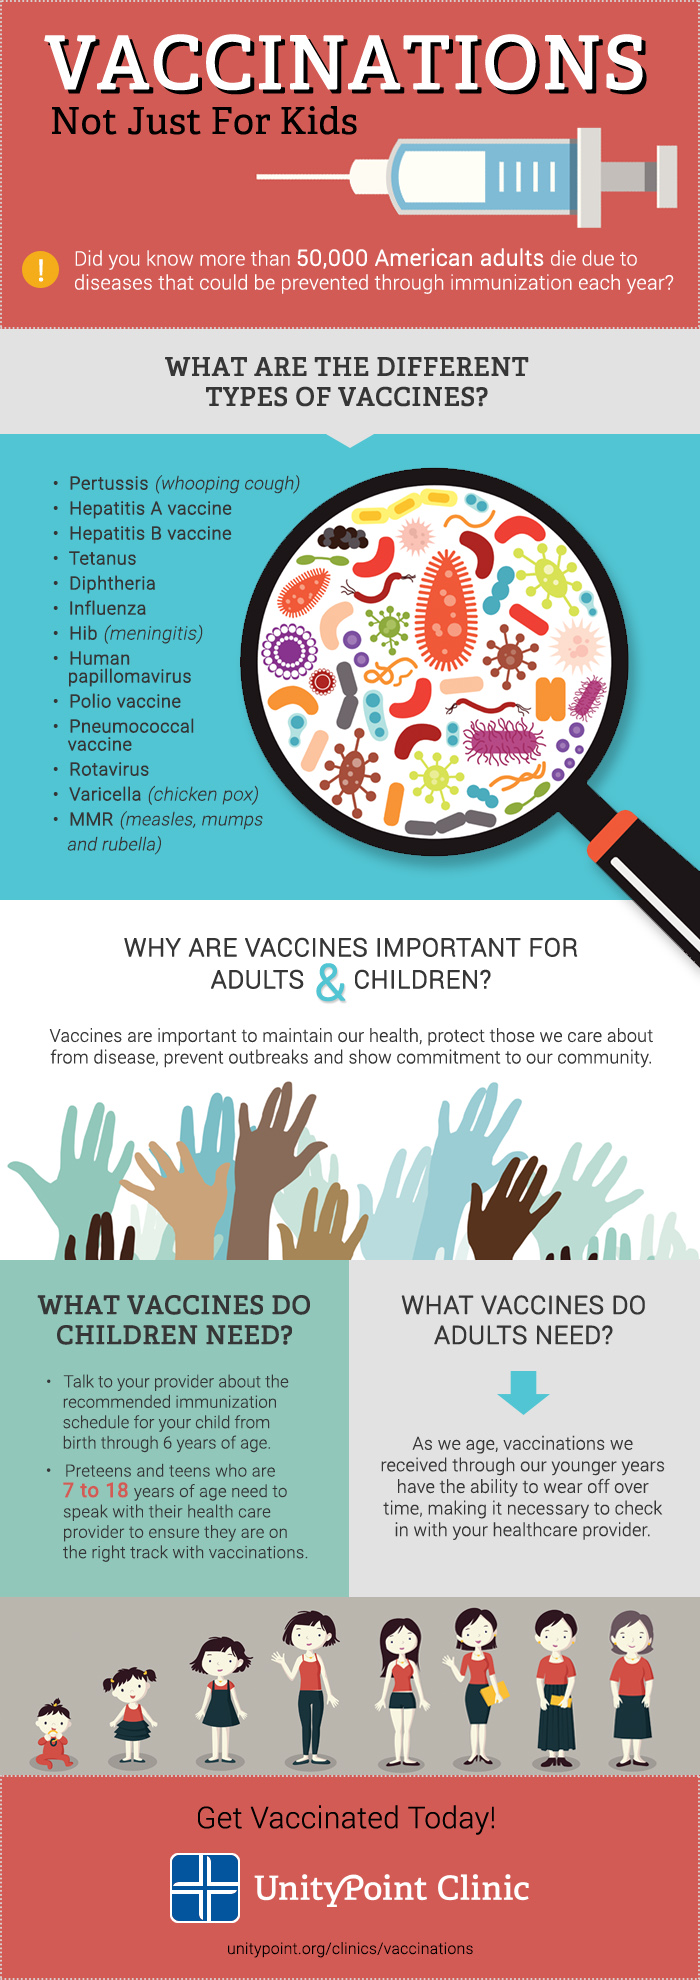 Vaccinations Not Just For Kids Infographic